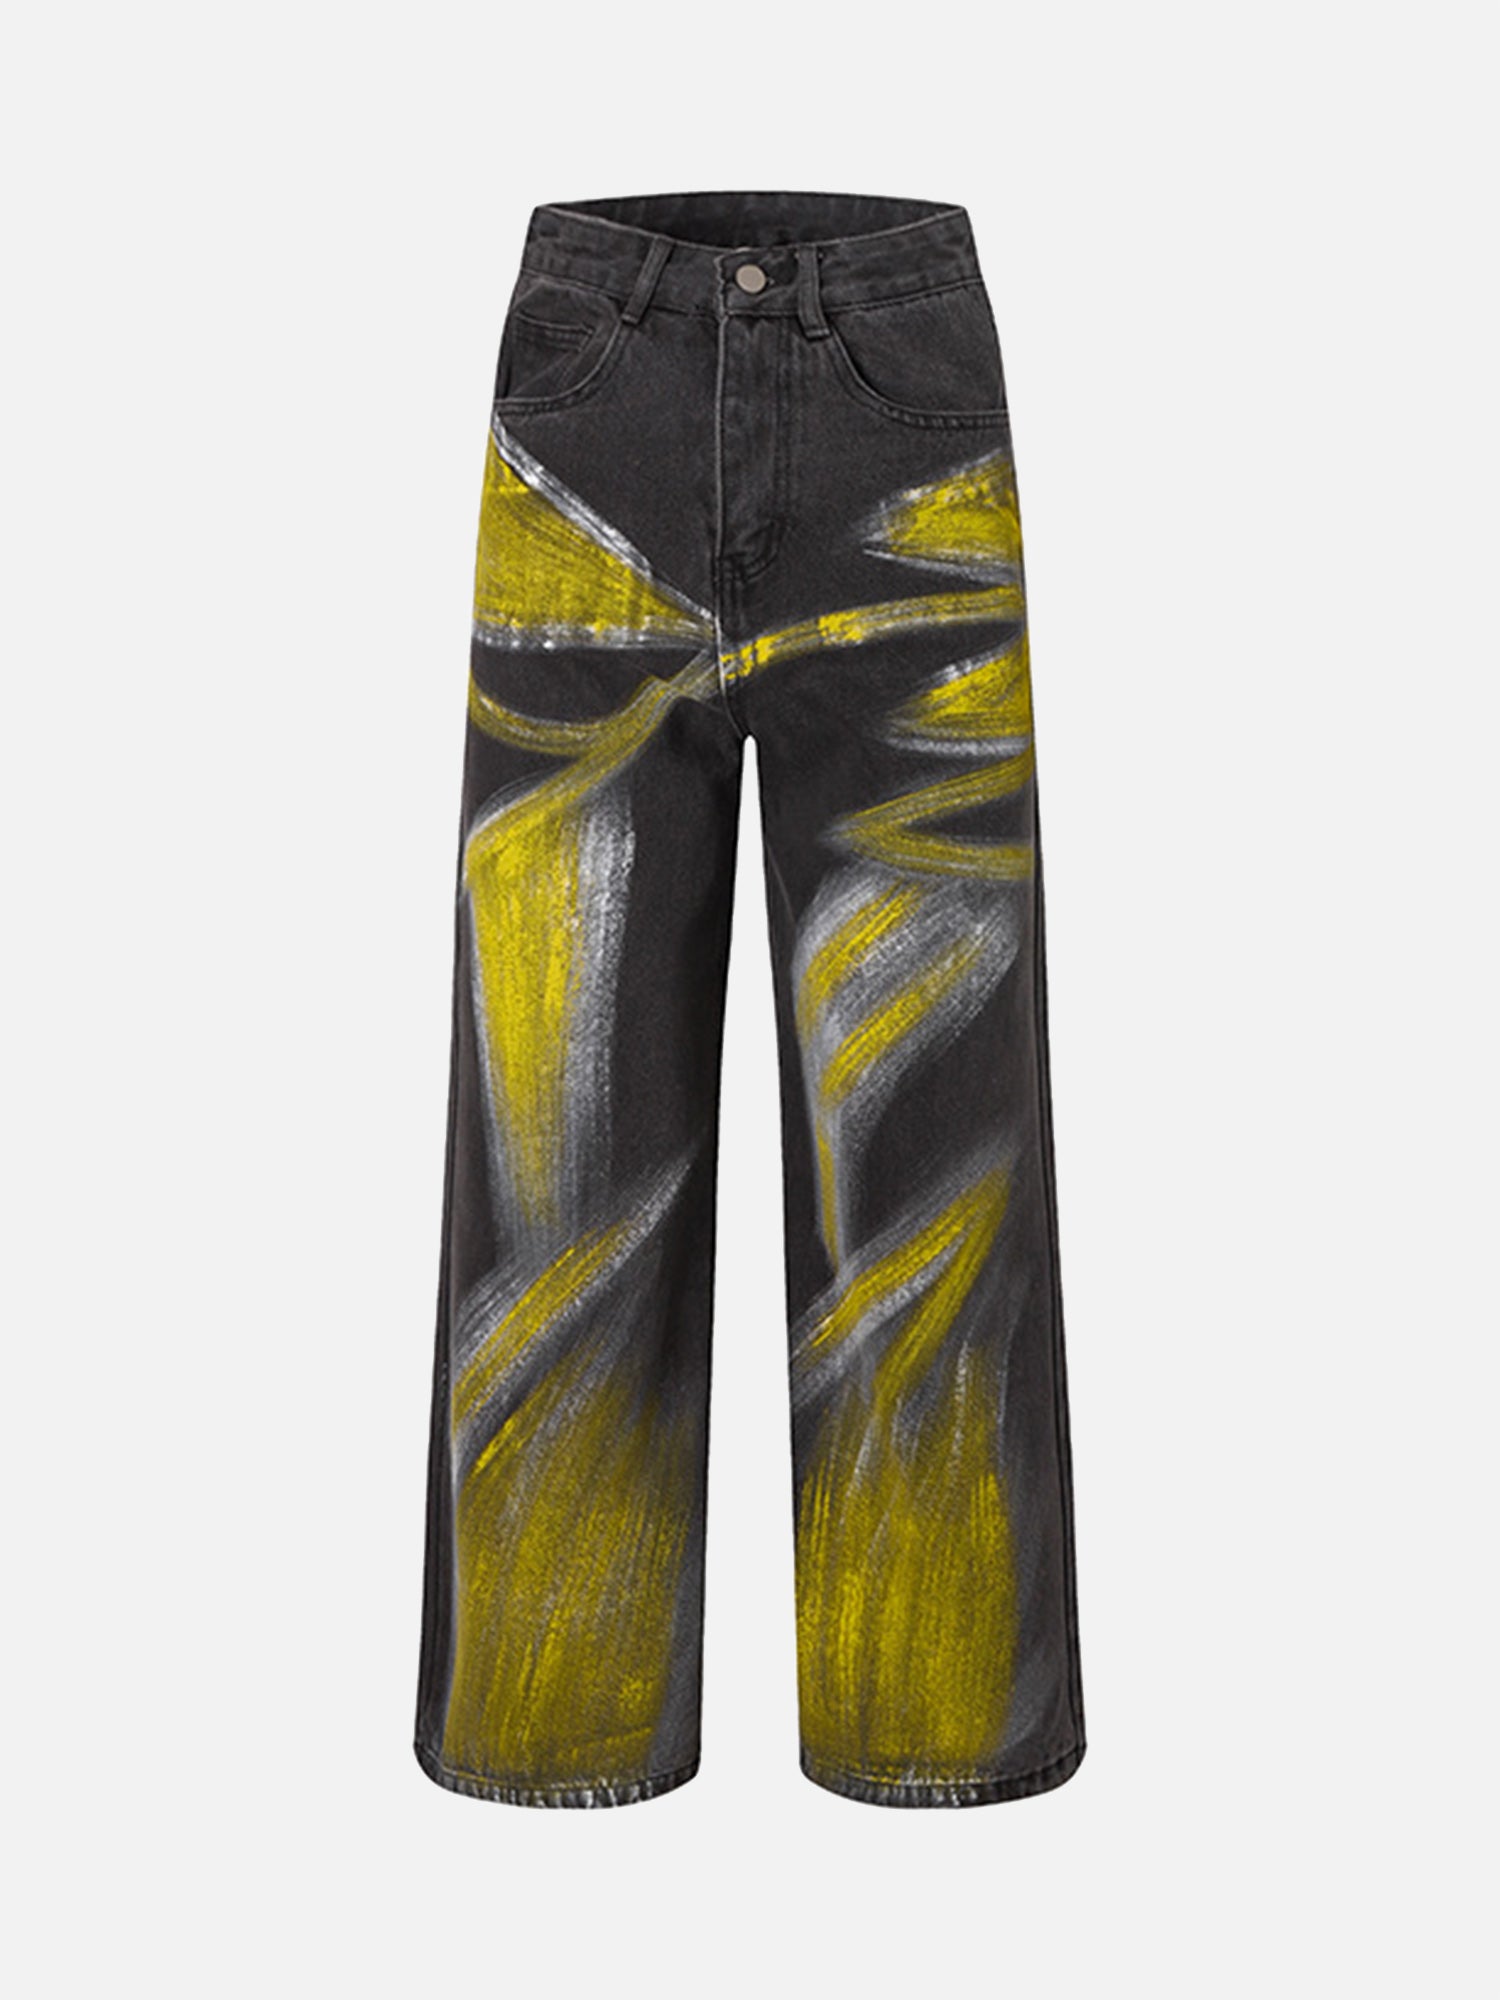 High Street Heavy Industry Graffiti Washed Jeans